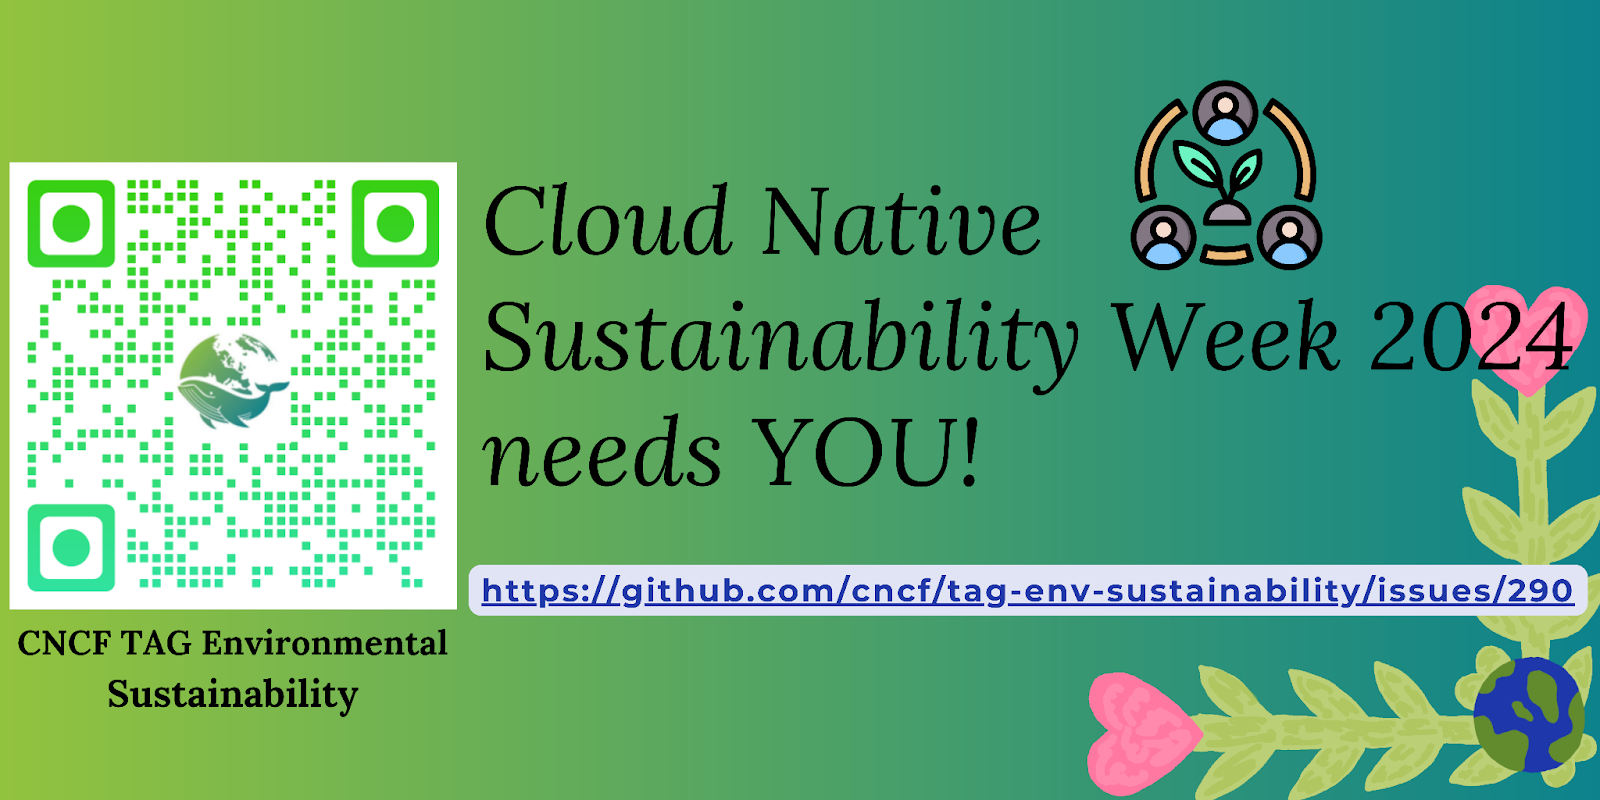 Banner for encouraging to support and contribute to CNCF TAG Environmental Sustainability Cloud Native Sustainability Week 2024 by joining discussion in the dedicated GitHub issue: https://github.com/cncf/tag-env-sustainability/issues/290 